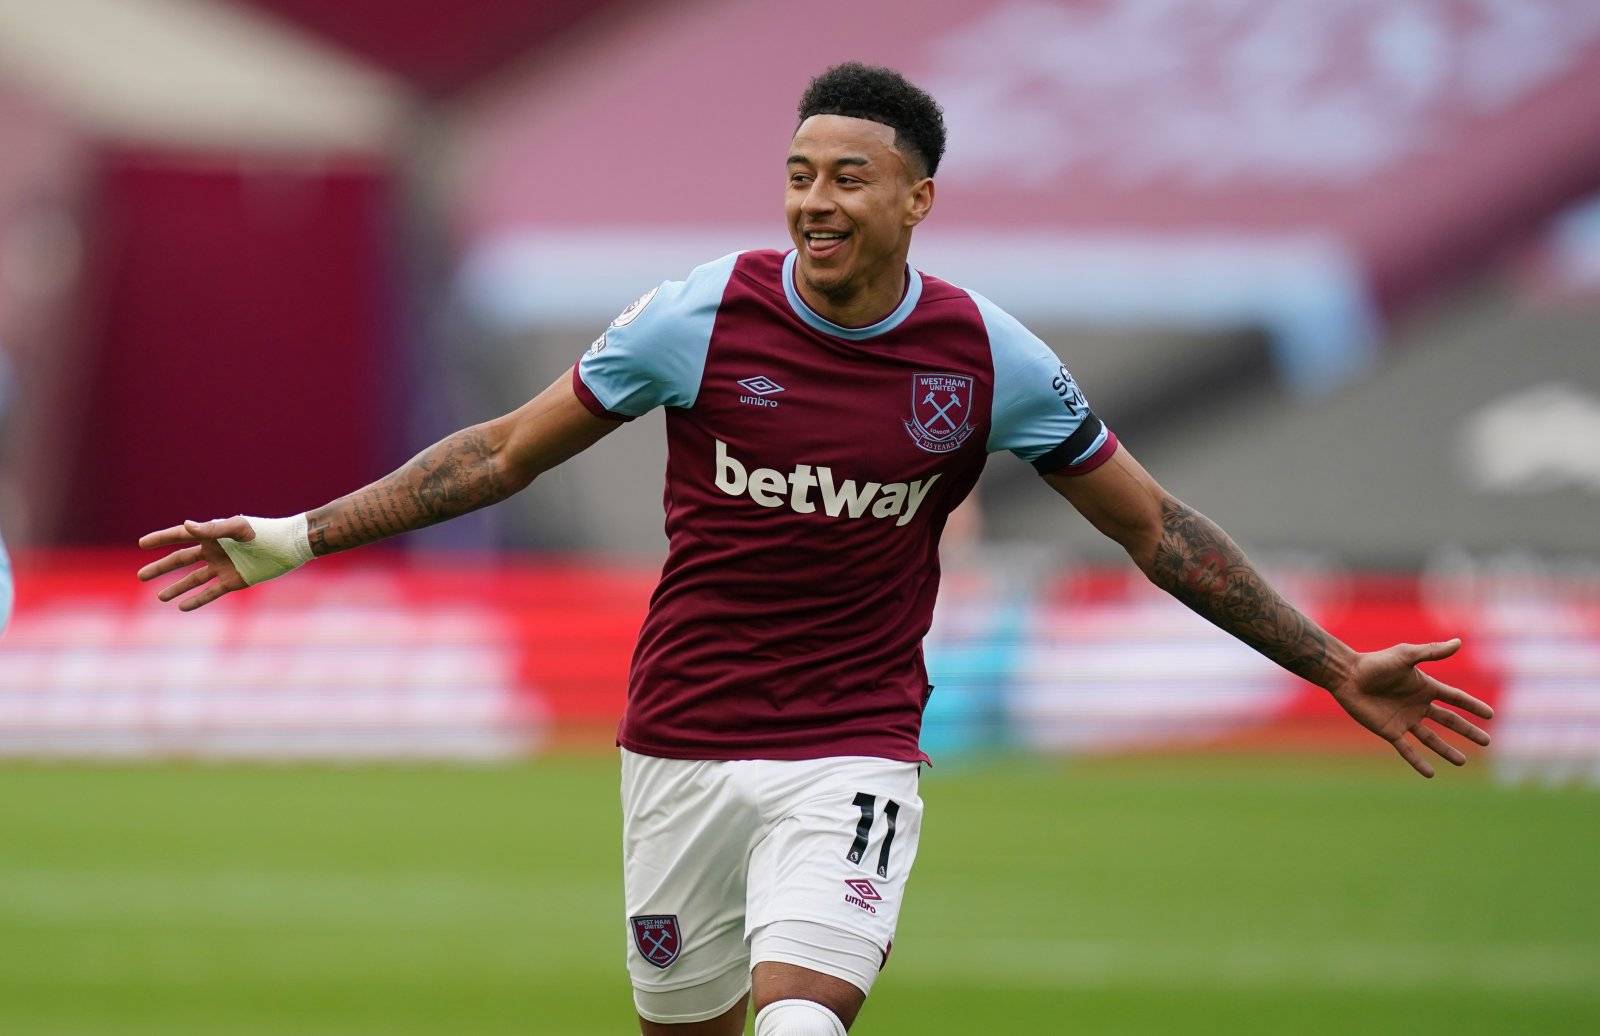 Exclusive: Pundit claims Jesse Lingard would be keen to repay faith by joining West Ham - Exclusive